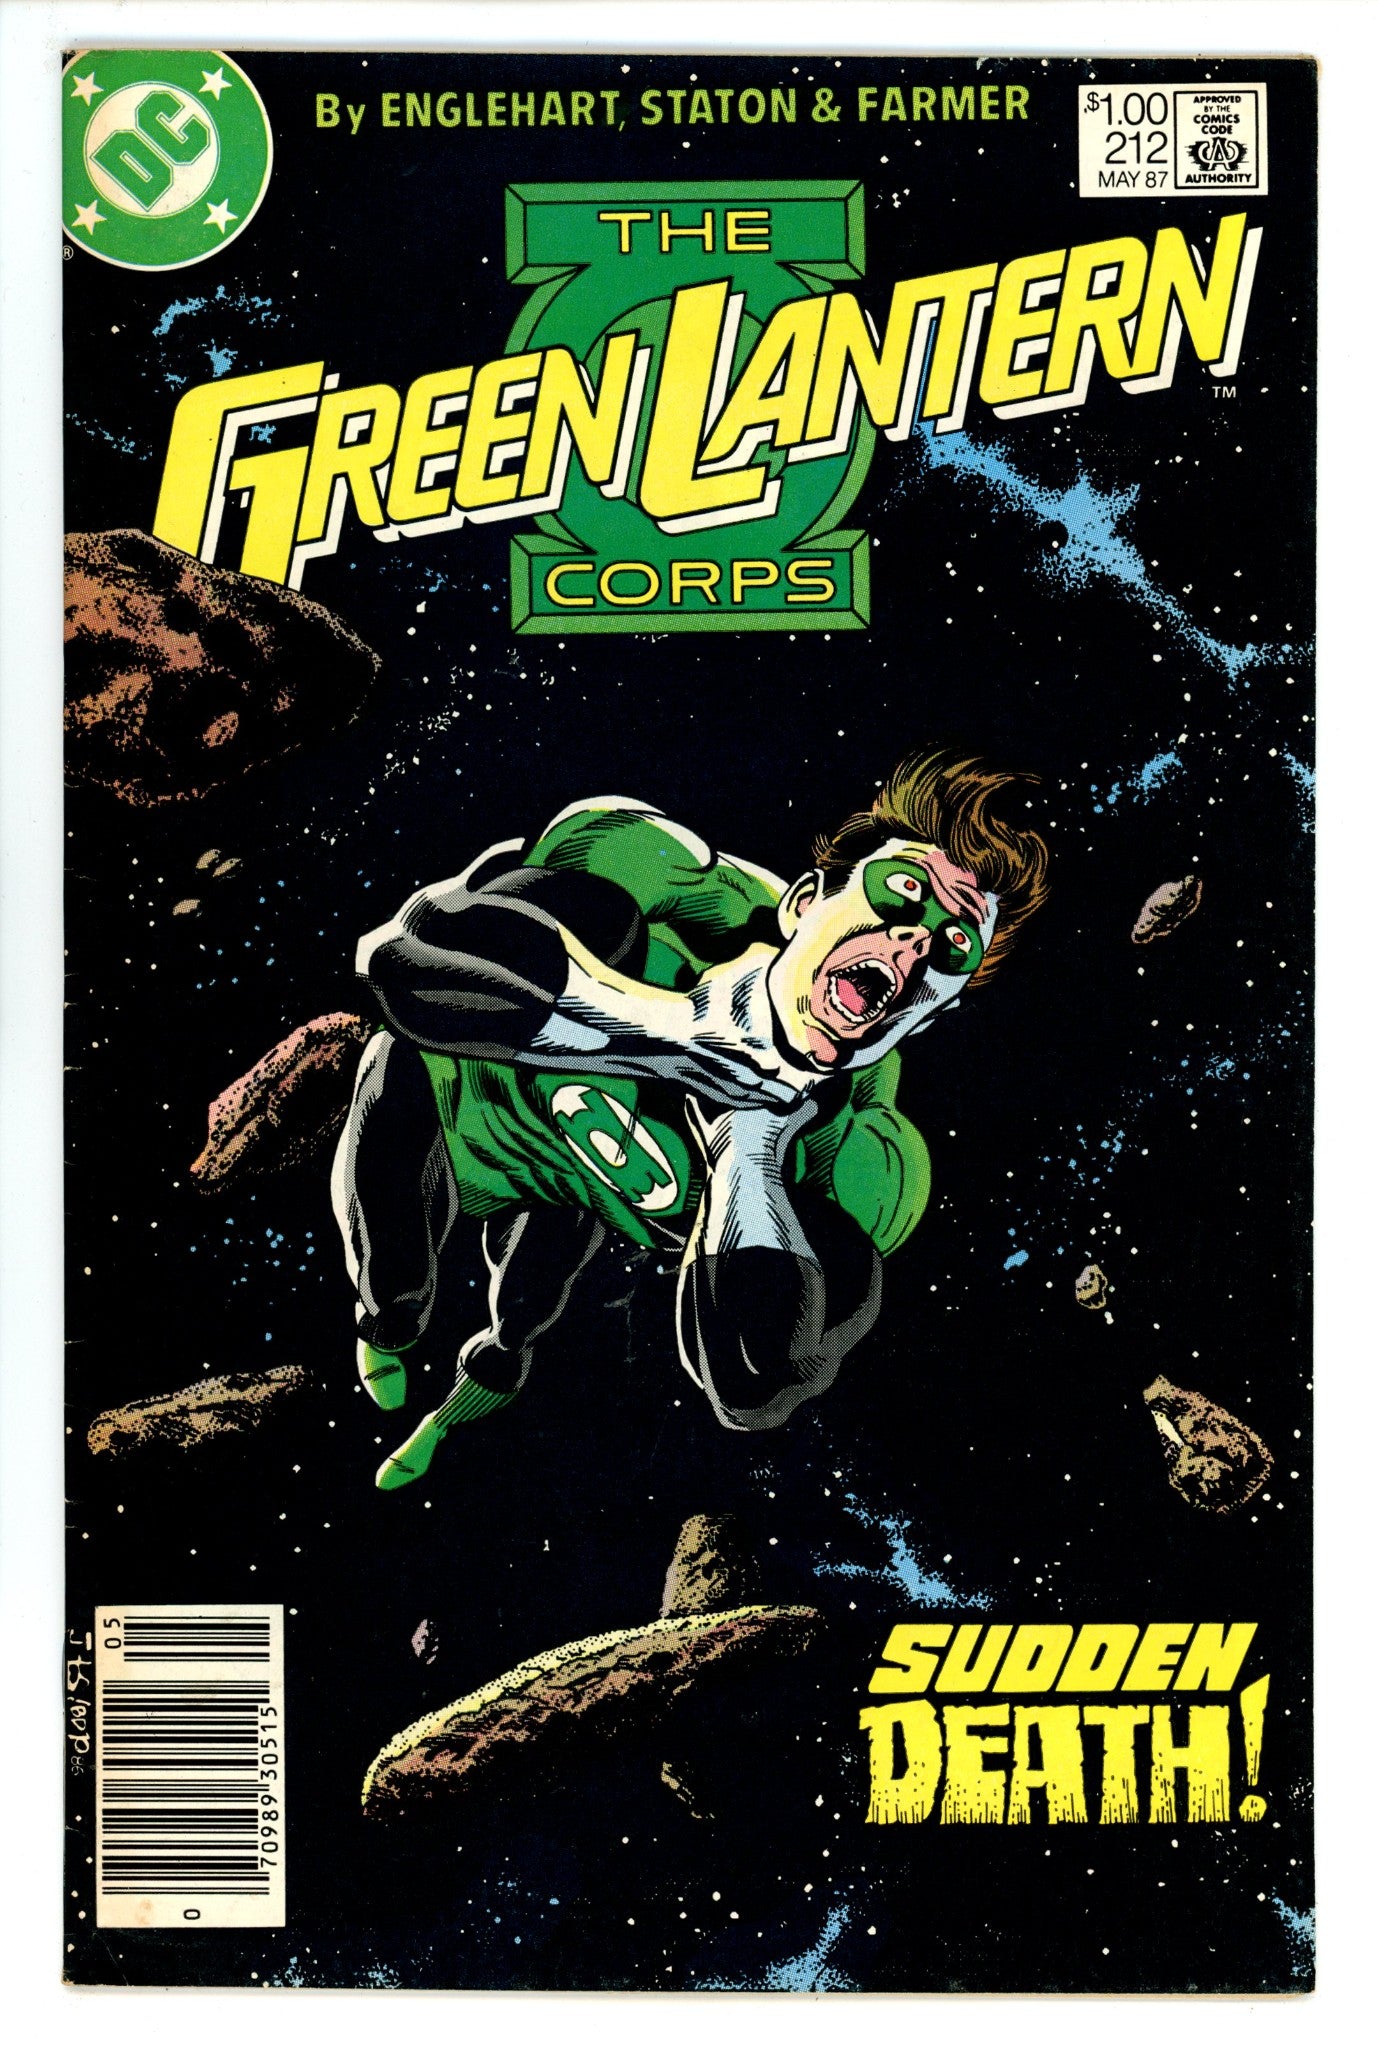 The Green Lantern Corps Vol 2 212 FN- (5.5) (1987) Canadian Price Variant 